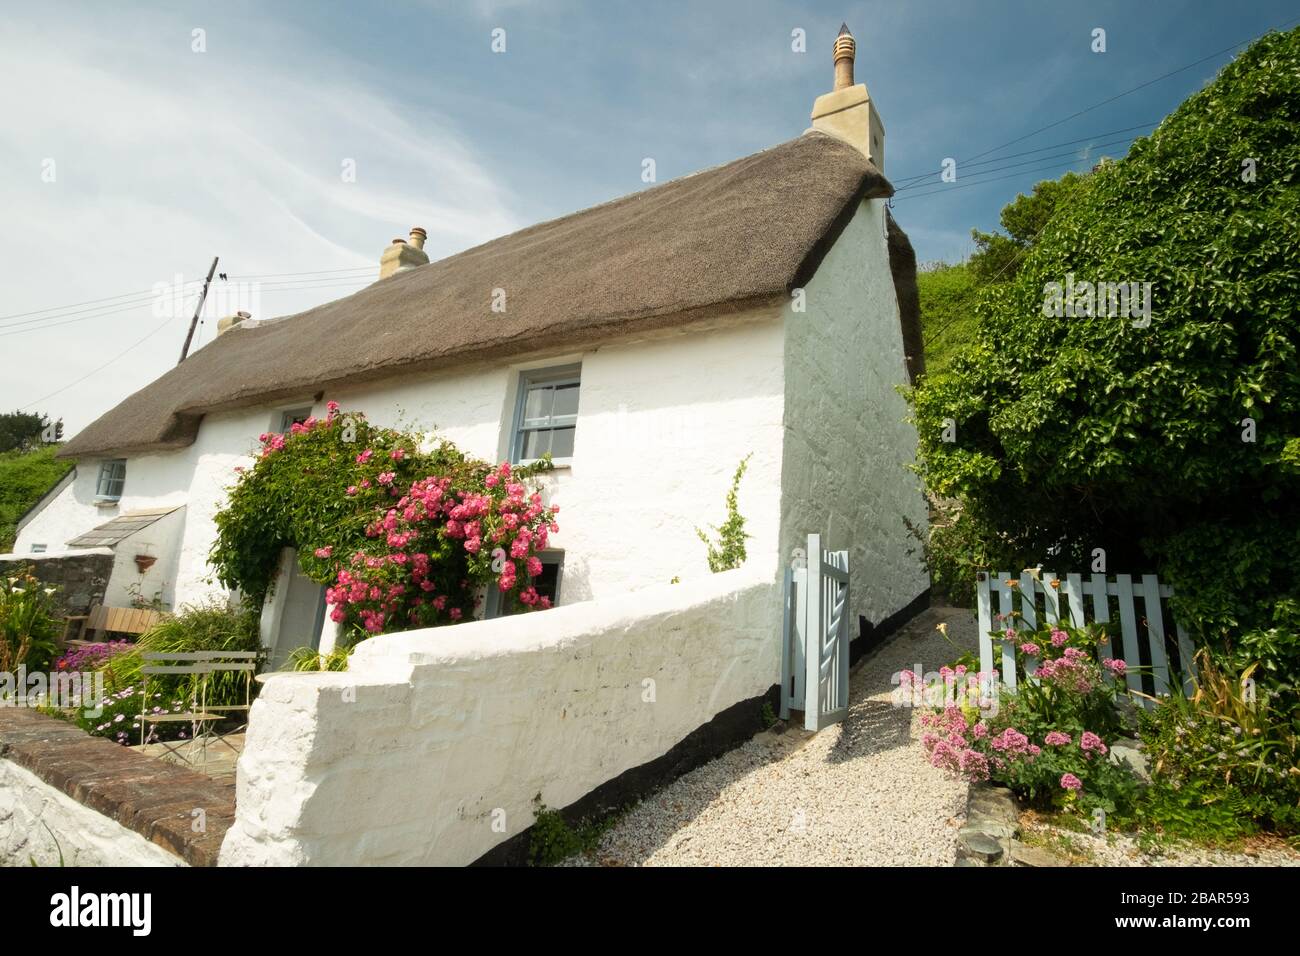 Traditional pretty thatched white cottage with pink roses over the front door in the small quaint fishing village of Cadgwith, Cornwall, England Stock Photo